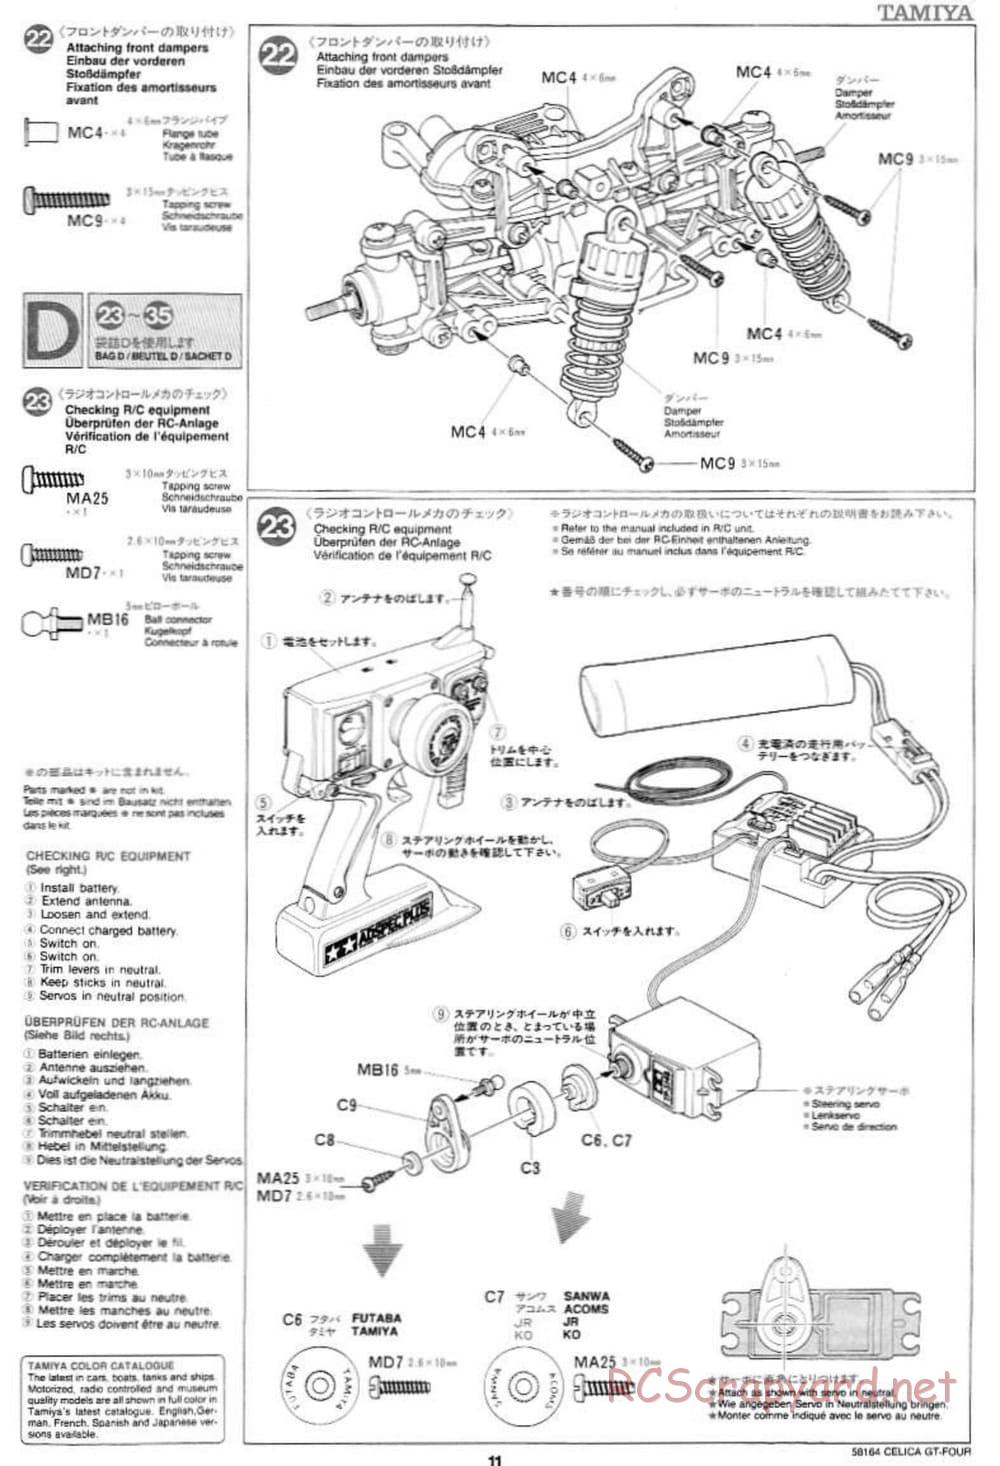 Tamiya - Toyota Celica GT Four - TA-02 Chassis - Manual - Page 11